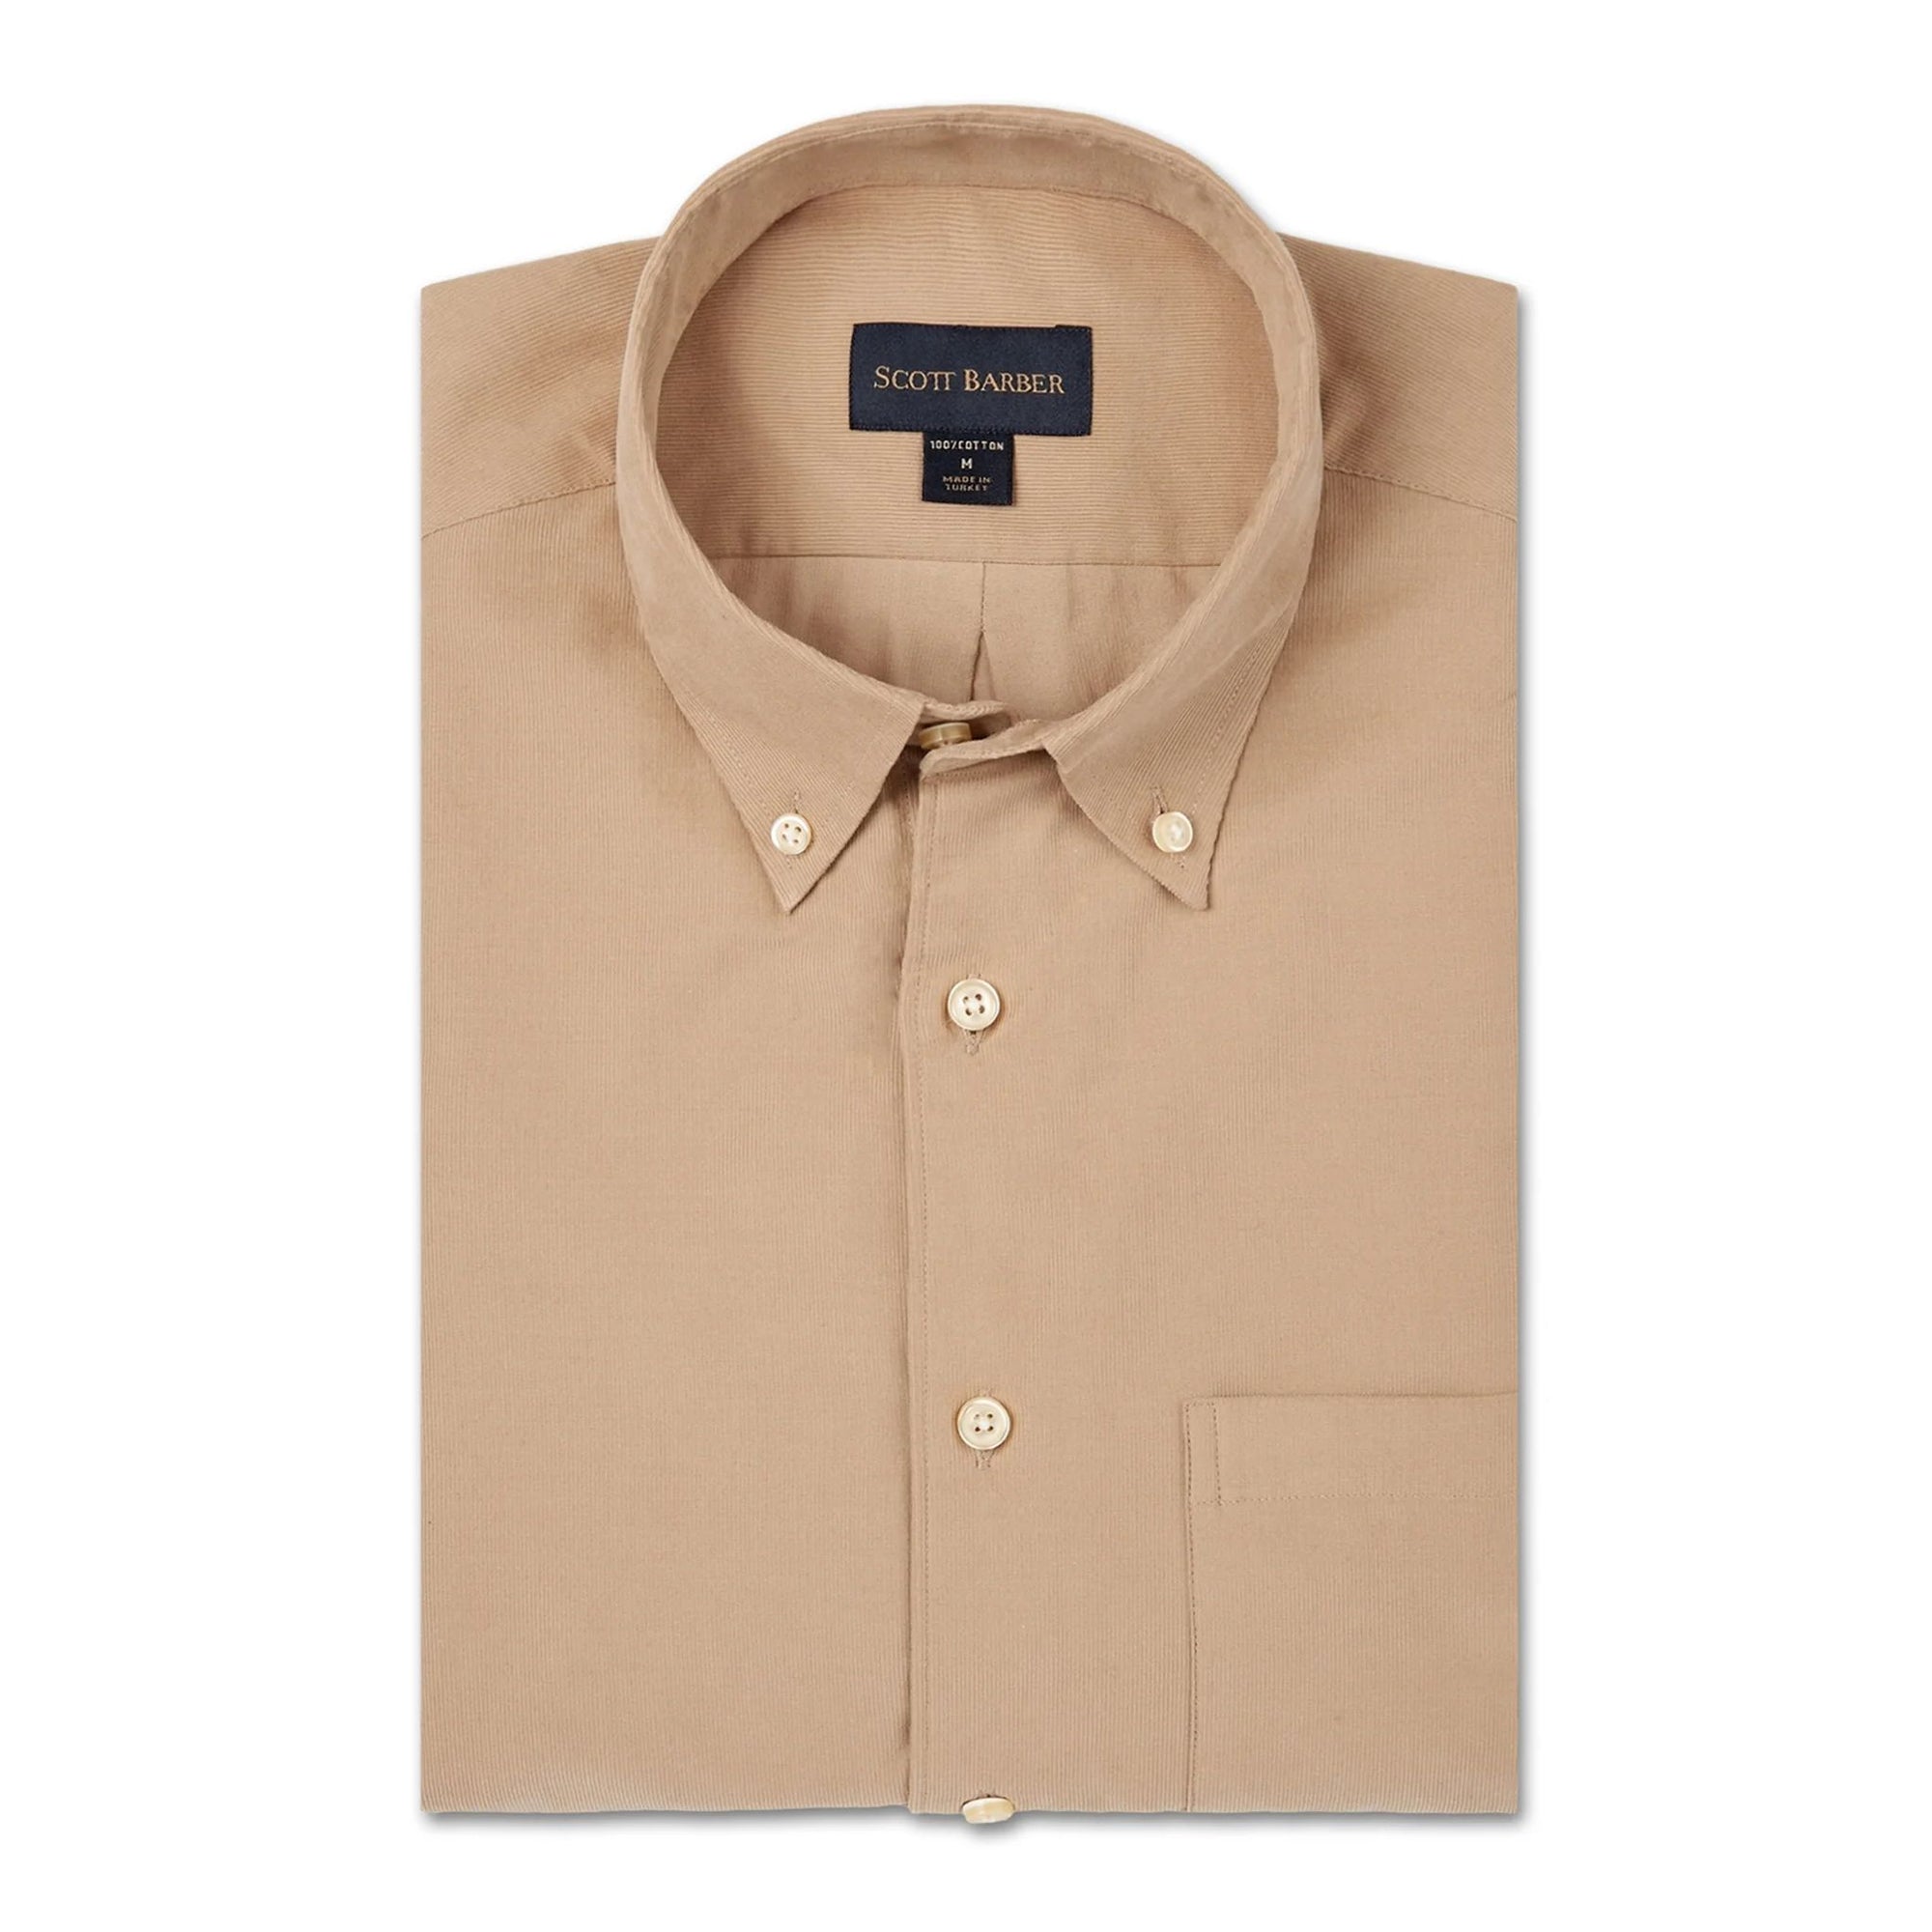 Solid Baby Cord Sport Shirt in Khaki by Scott Barber